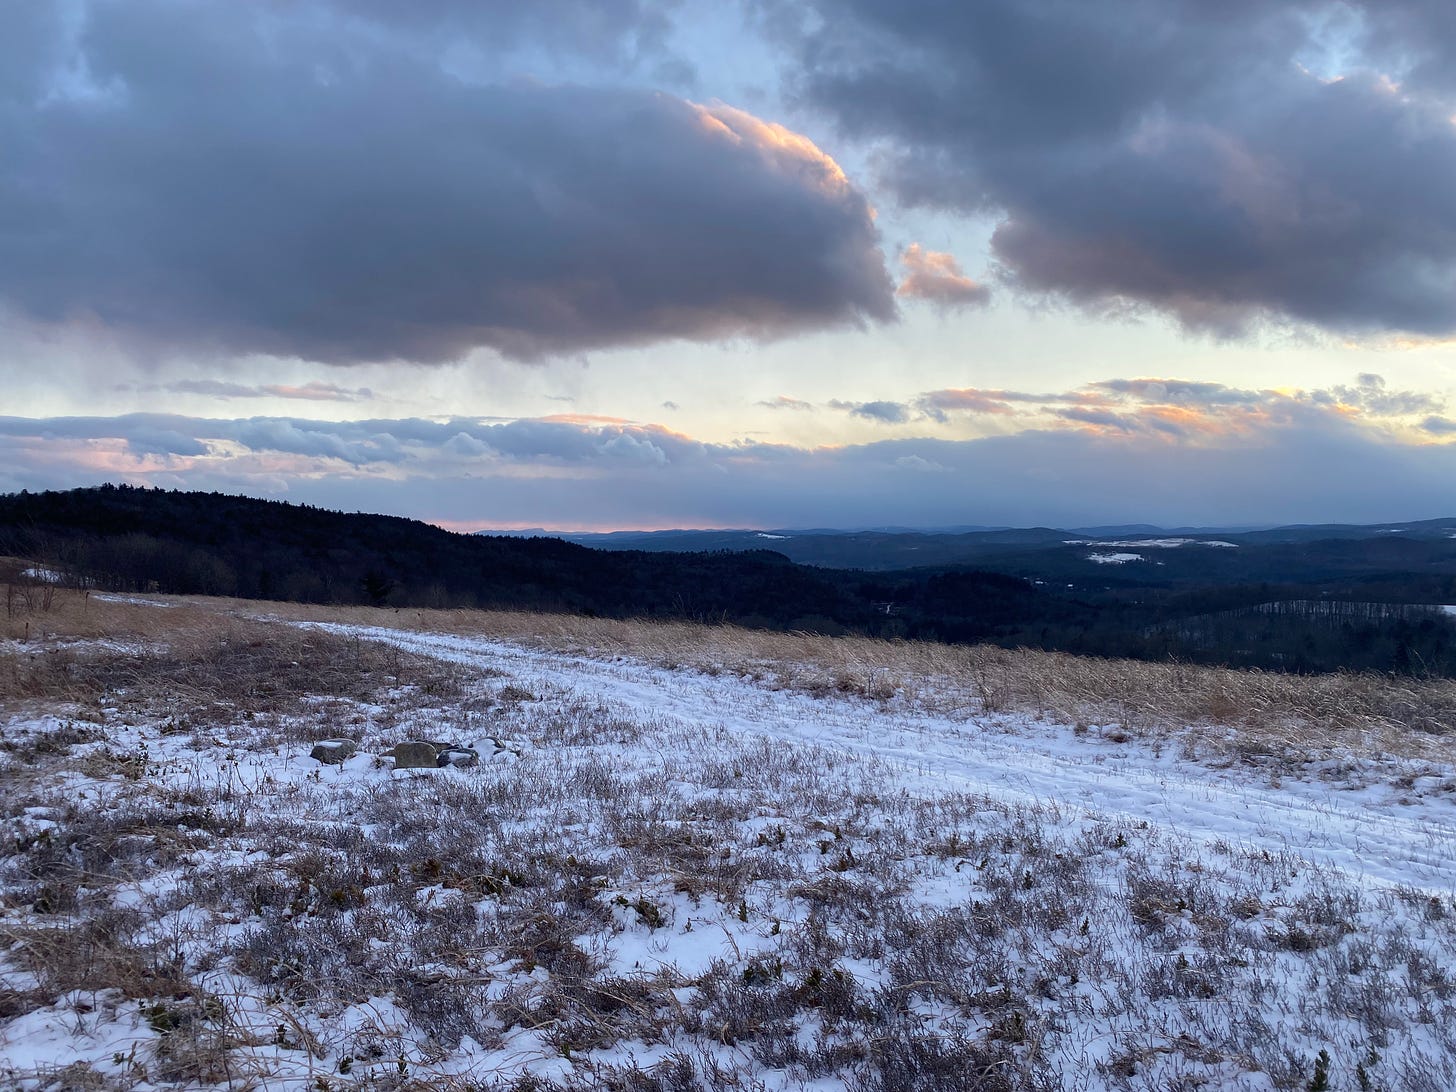 View of a snowy hill at sunset, looking out over an expanse of hills and fields. The sky is full of dark clouds edged in gold.